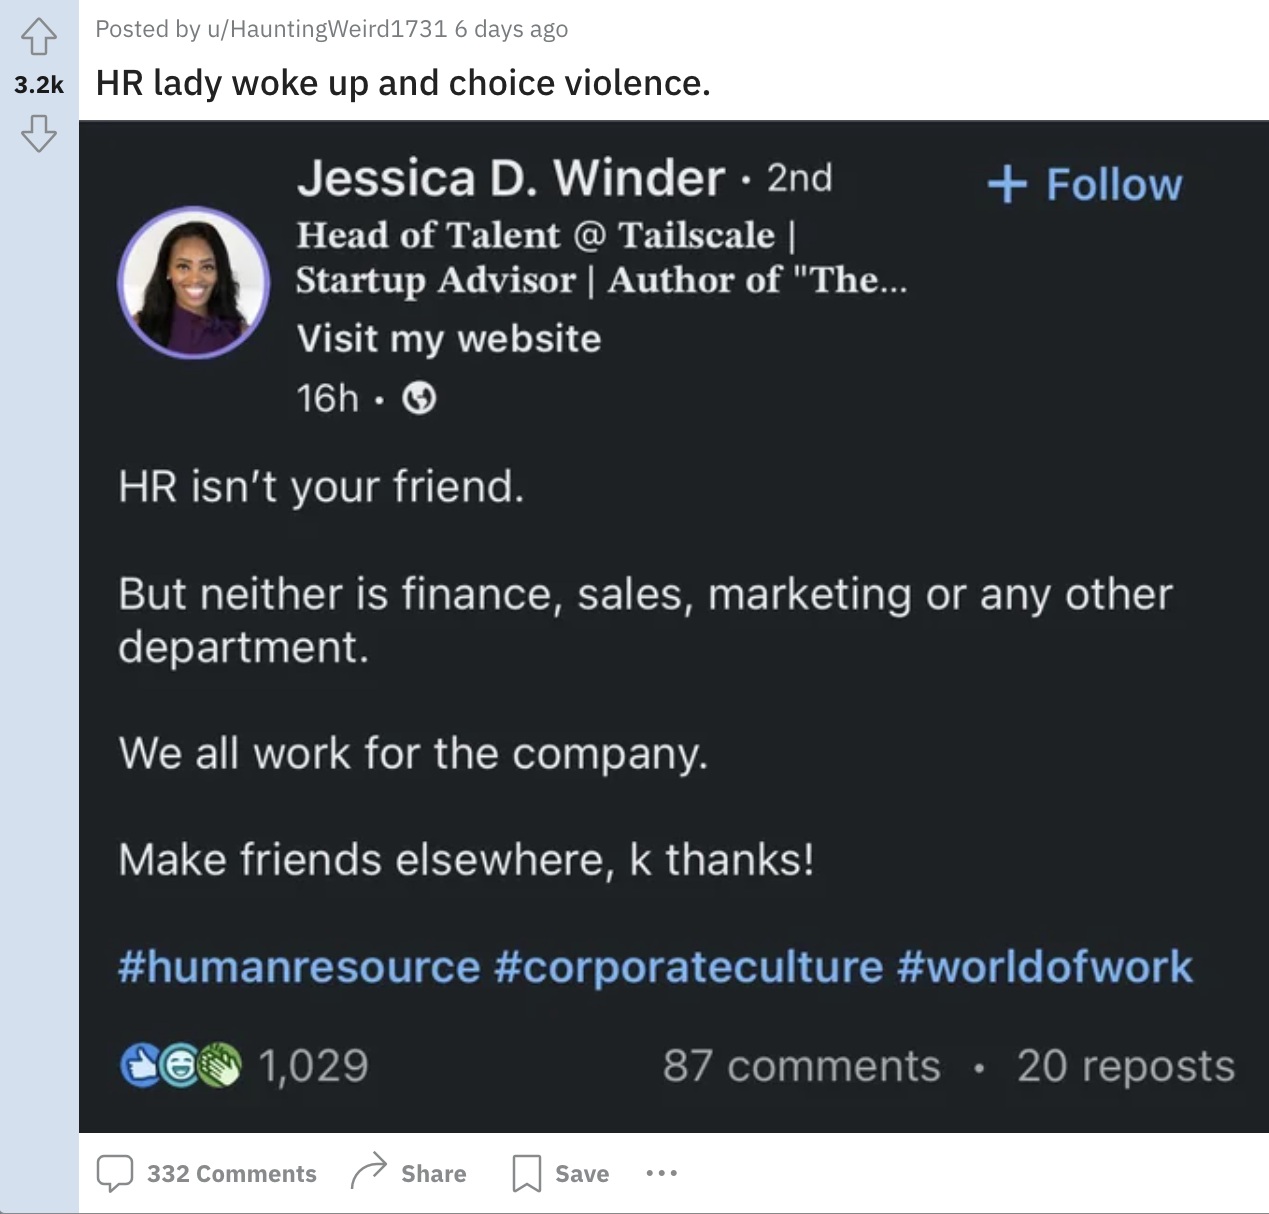 screenshot - Posted by uHauntingWeird 1731 6 days ago Hr lady woke up and choice violence. Jessica D. Winder. 2nd Head of Talent @ Tailscale | Startup Advisor | Author of "The... Visit my website 16h. Hr isn't your friend. But neither is finance, sales, m